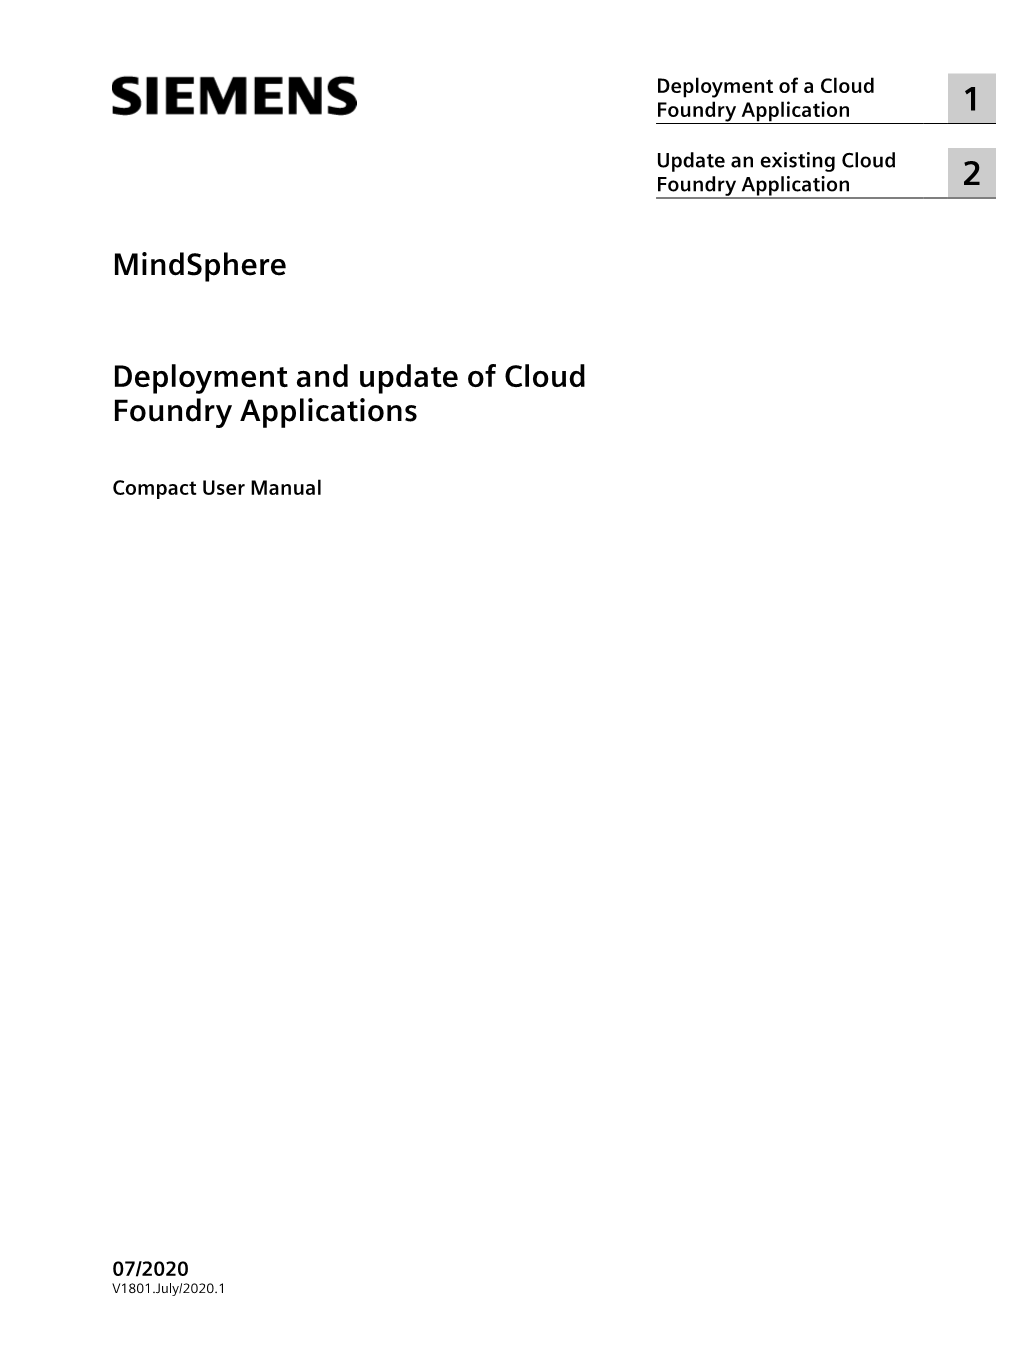 Deployment and Update of Cloud Foundry Applications